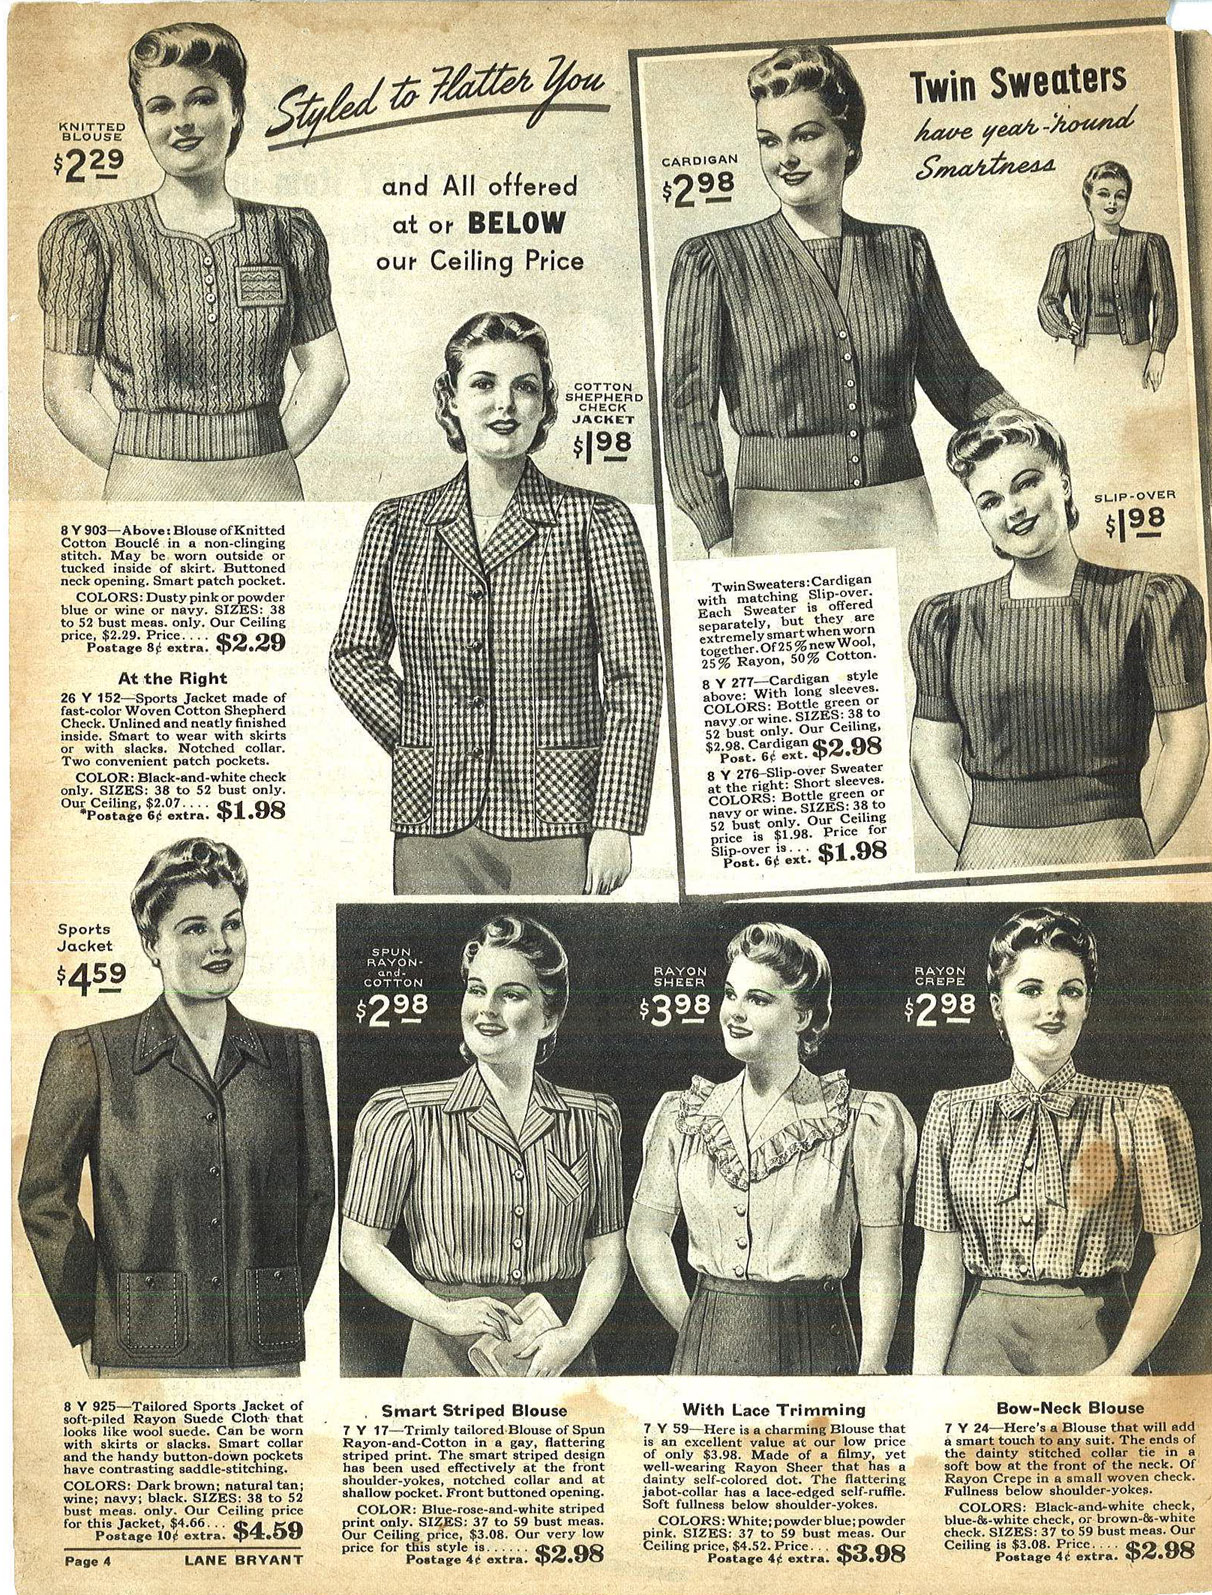 a vintage sewing pattern with a woman's blouse, shirt and shorts